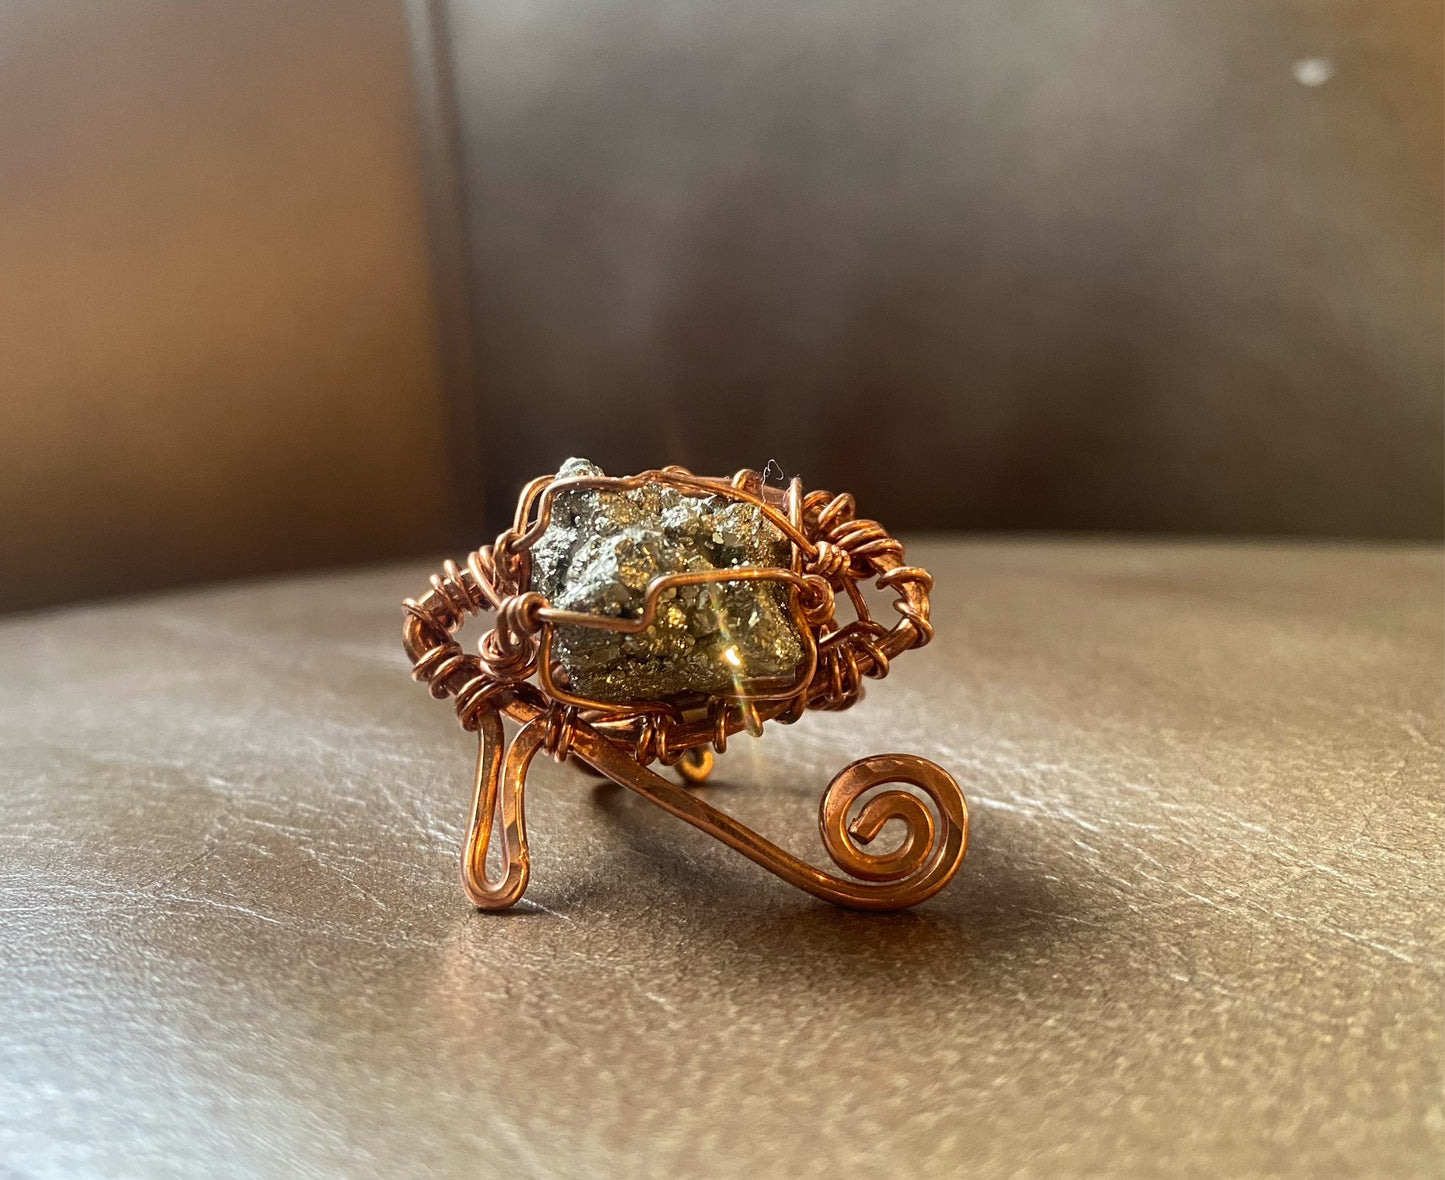 COPPER+PYRITE “EYE OF RADIANCE” RING